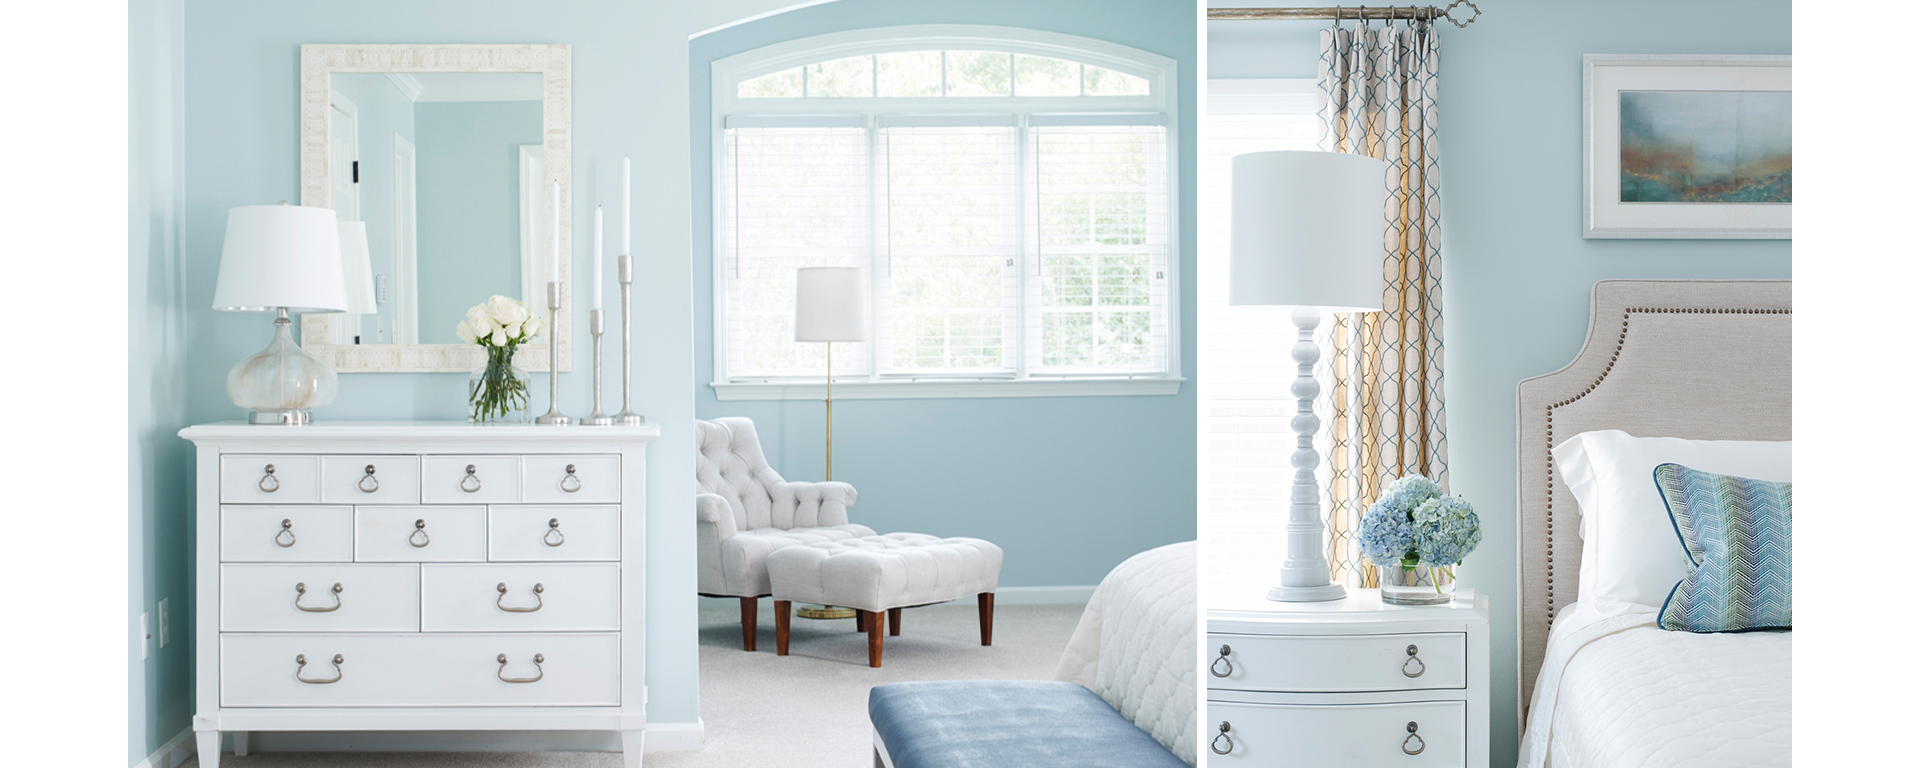 Relaxing and elegant bedroom with light blue walls, accents, and white furnishings and decor.